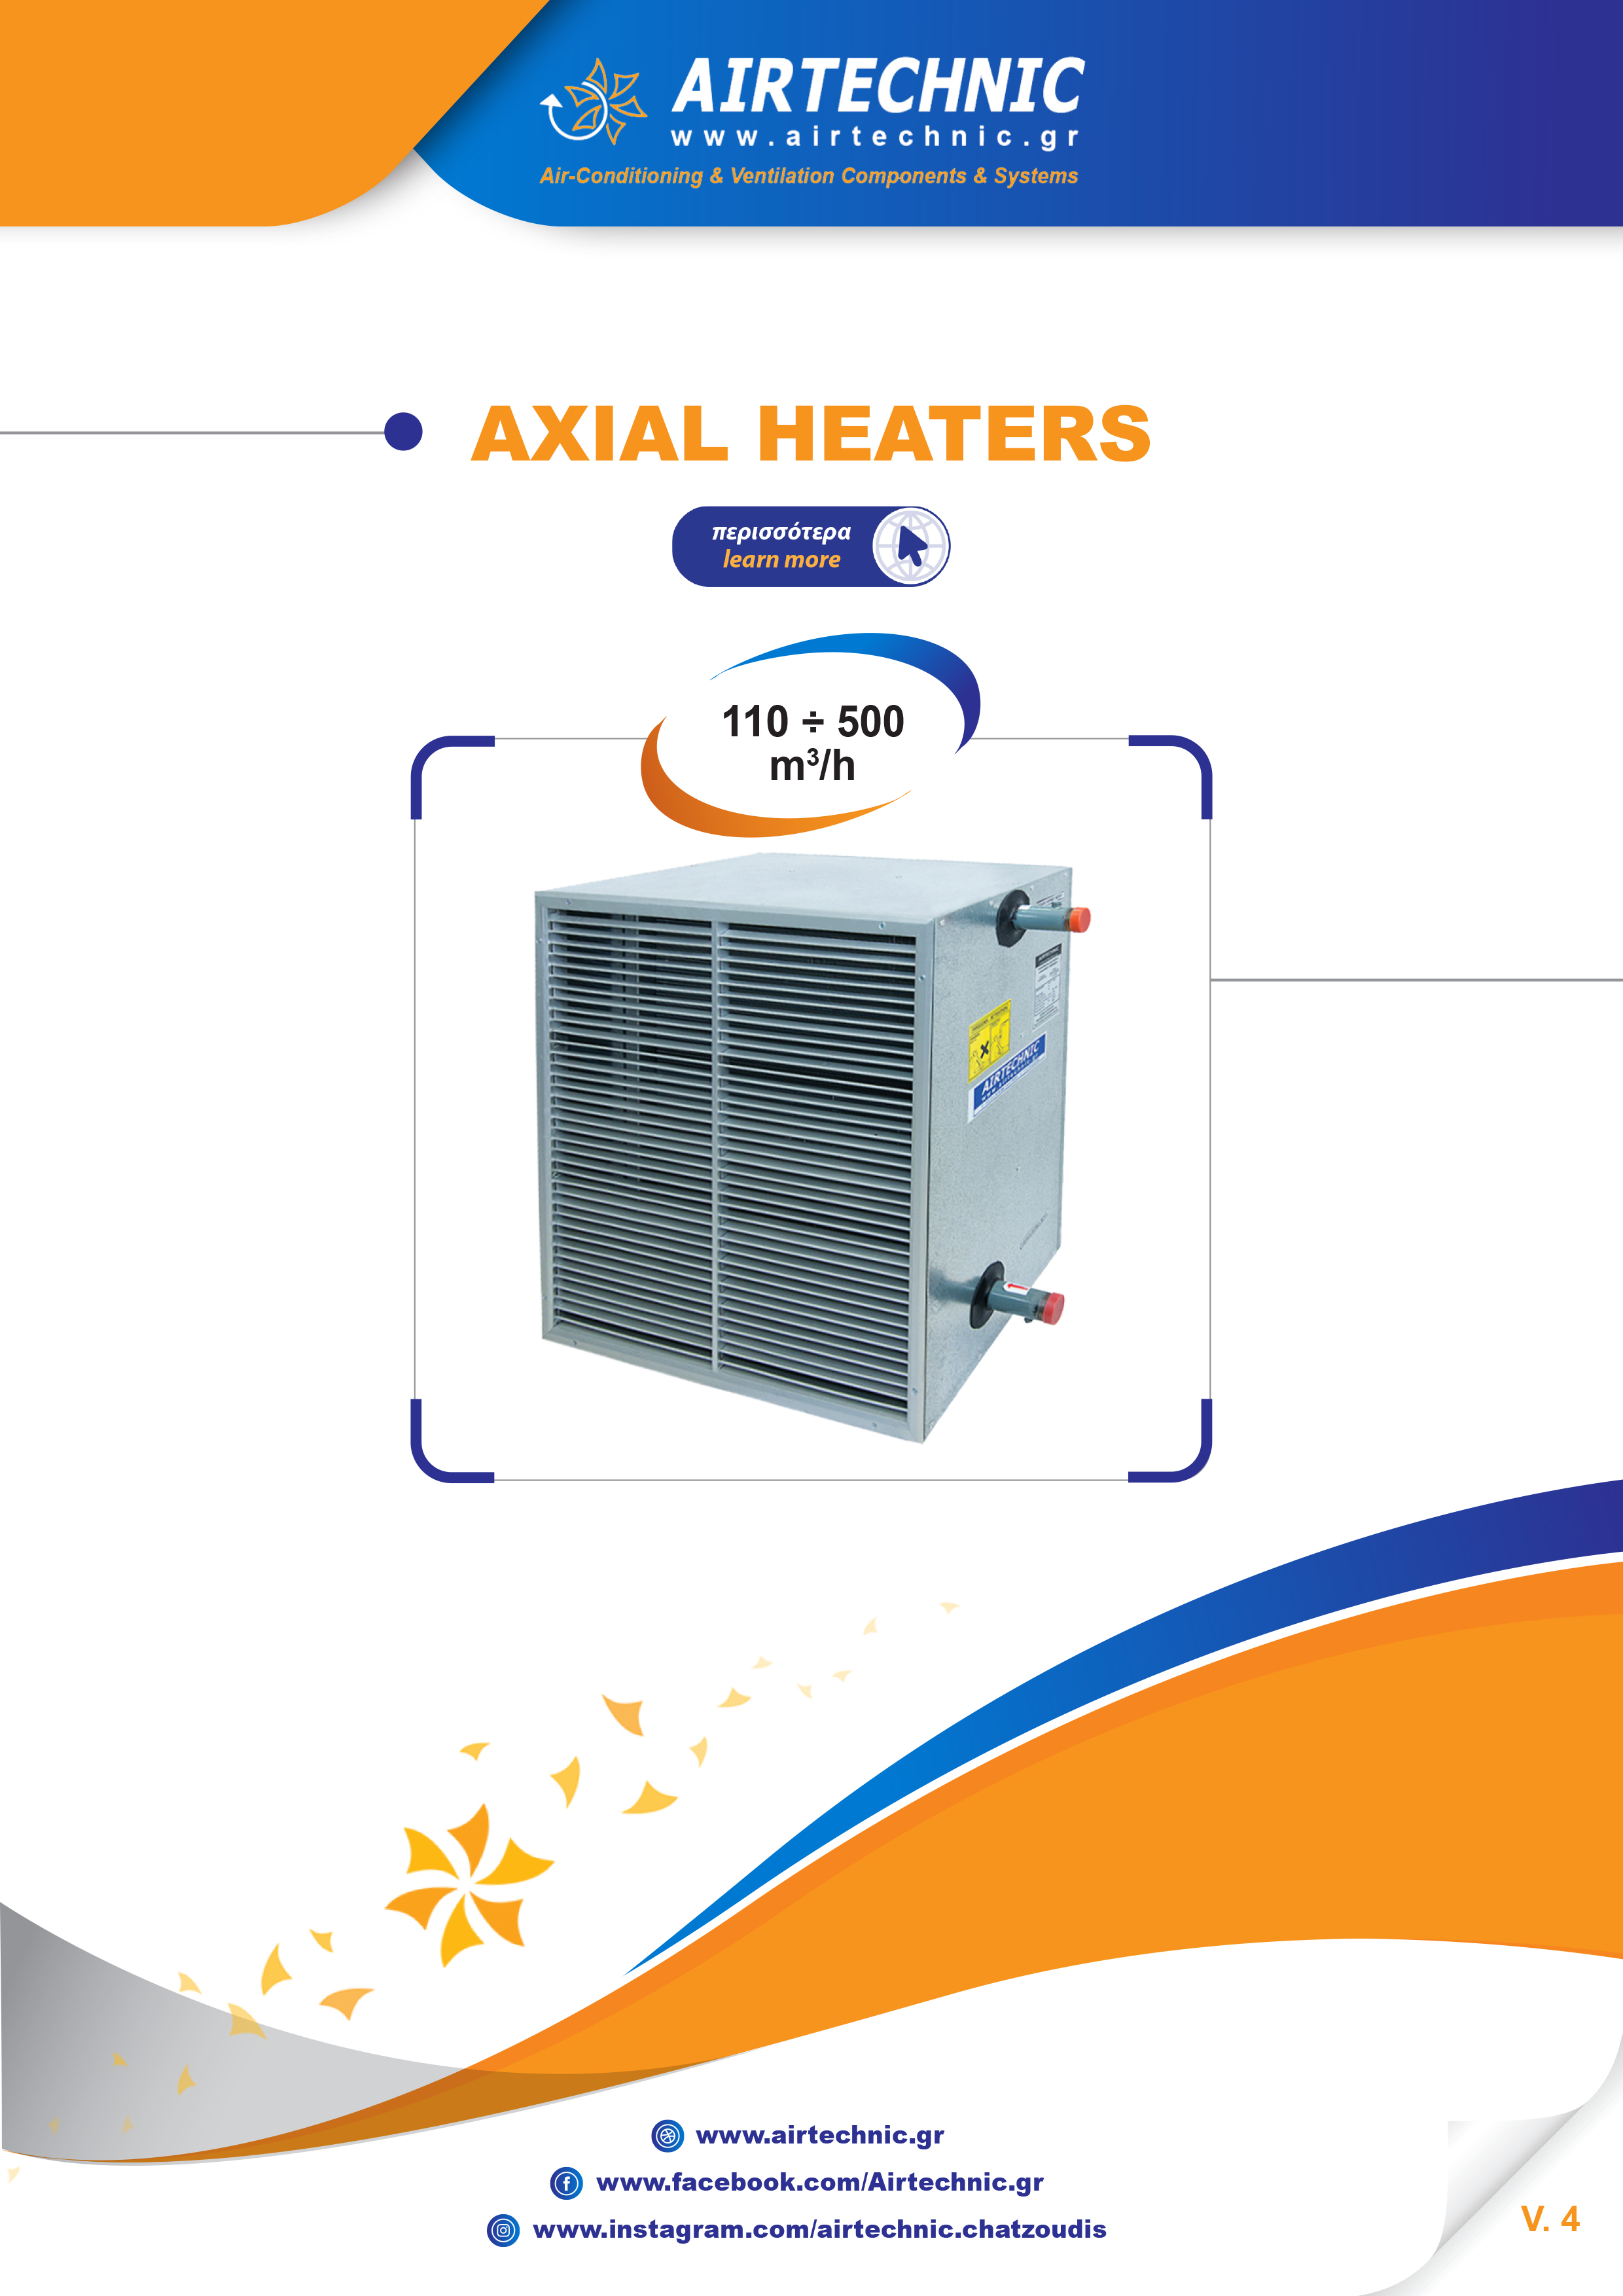 LEAFLET "AXIAL HEATERS"